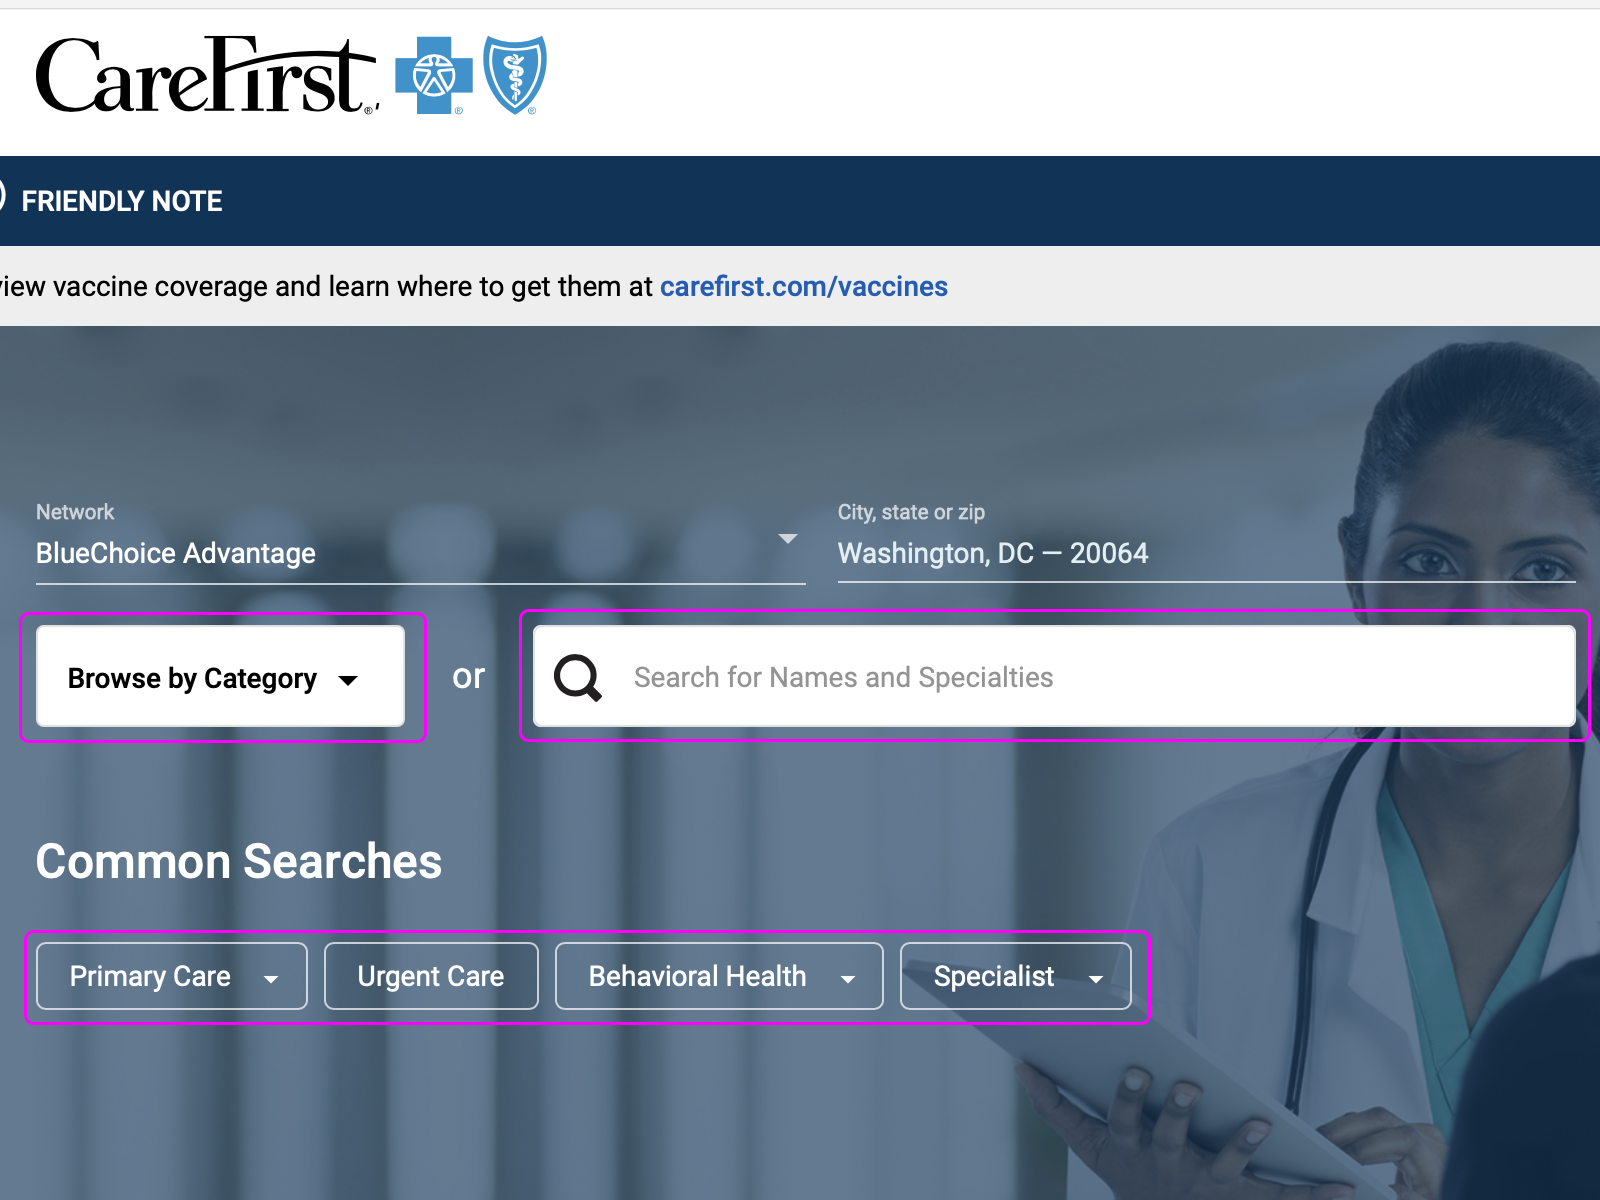 Screenshot of CareFirst website showing locations of the three search options.